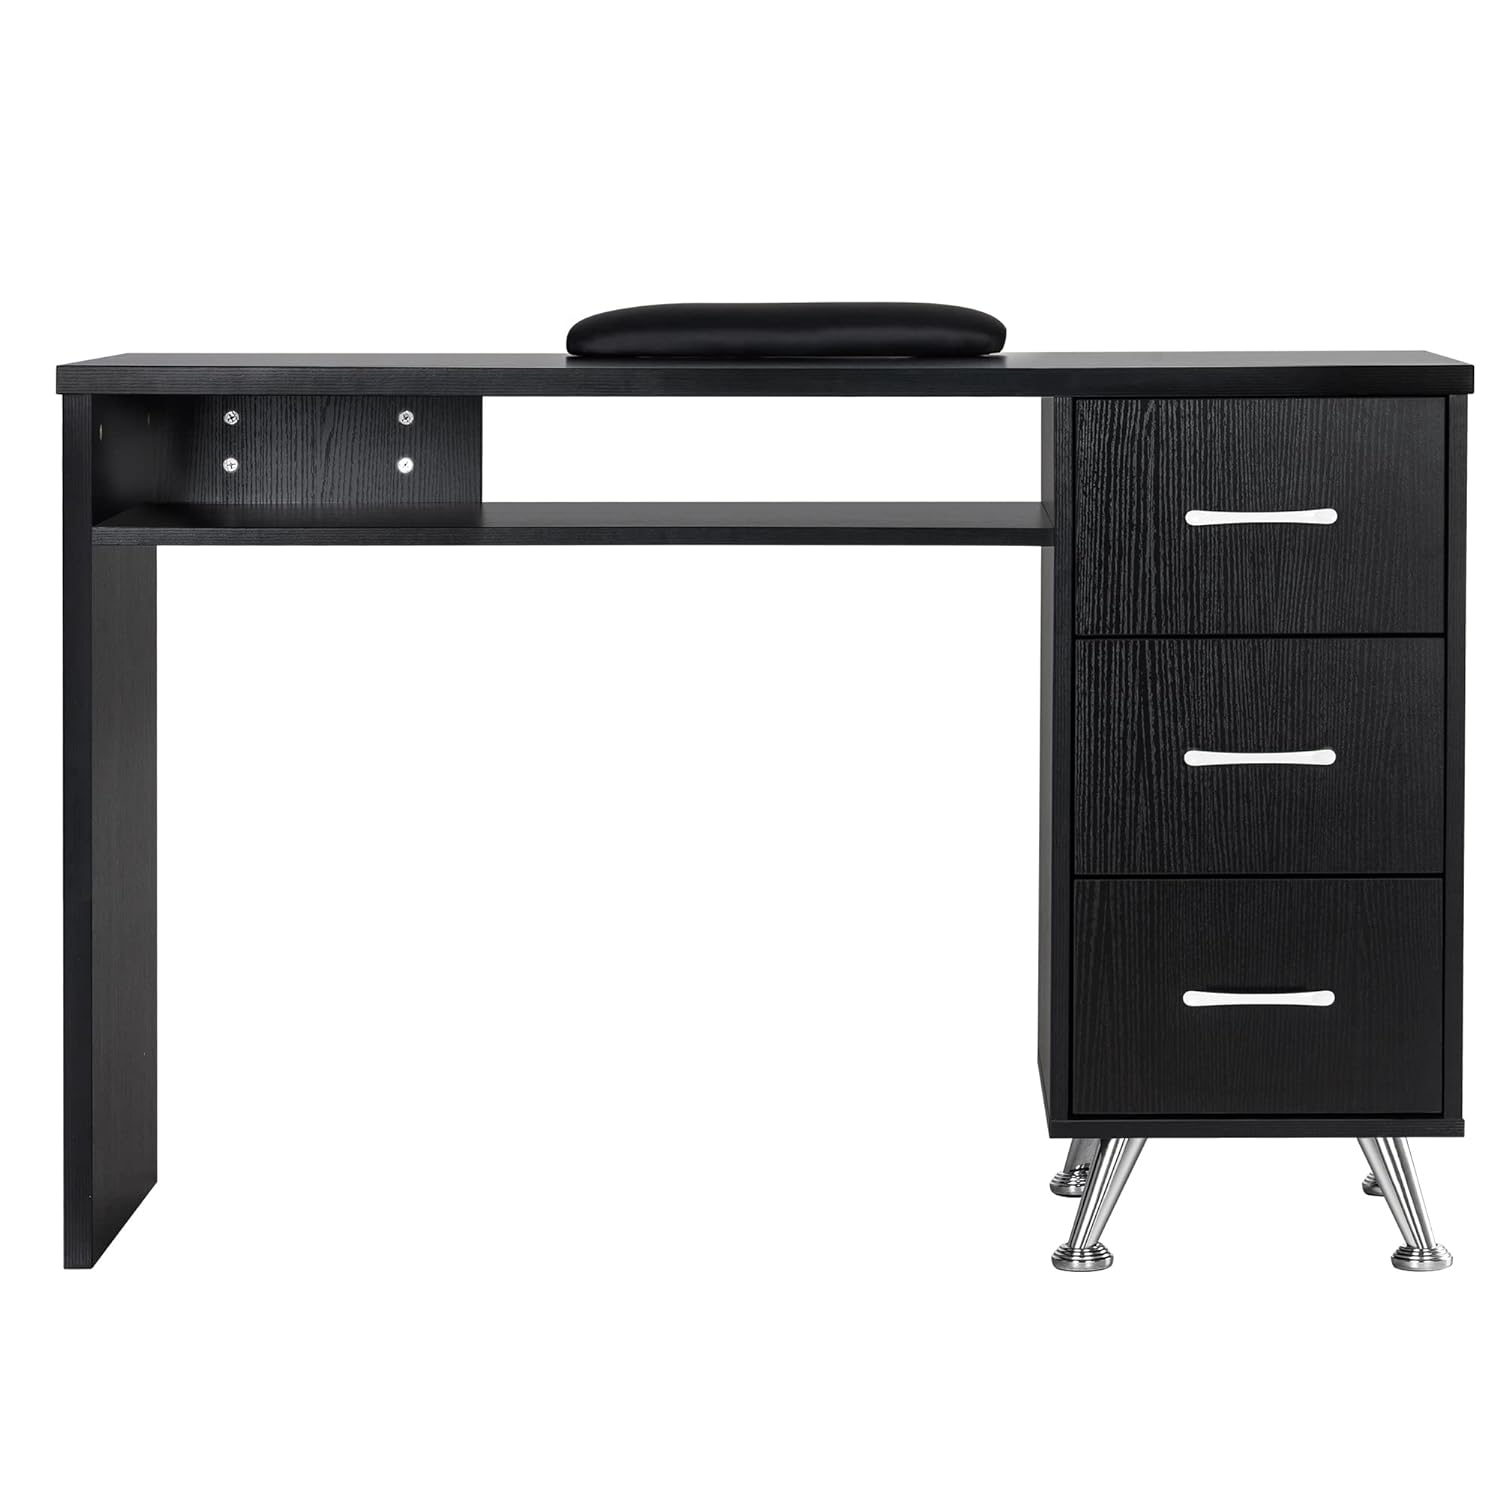 BarberPub Manicure Table with Drawers Nail Desk with Wrist Rest Salon Beauty Spa Storage Workstation 6153-2655